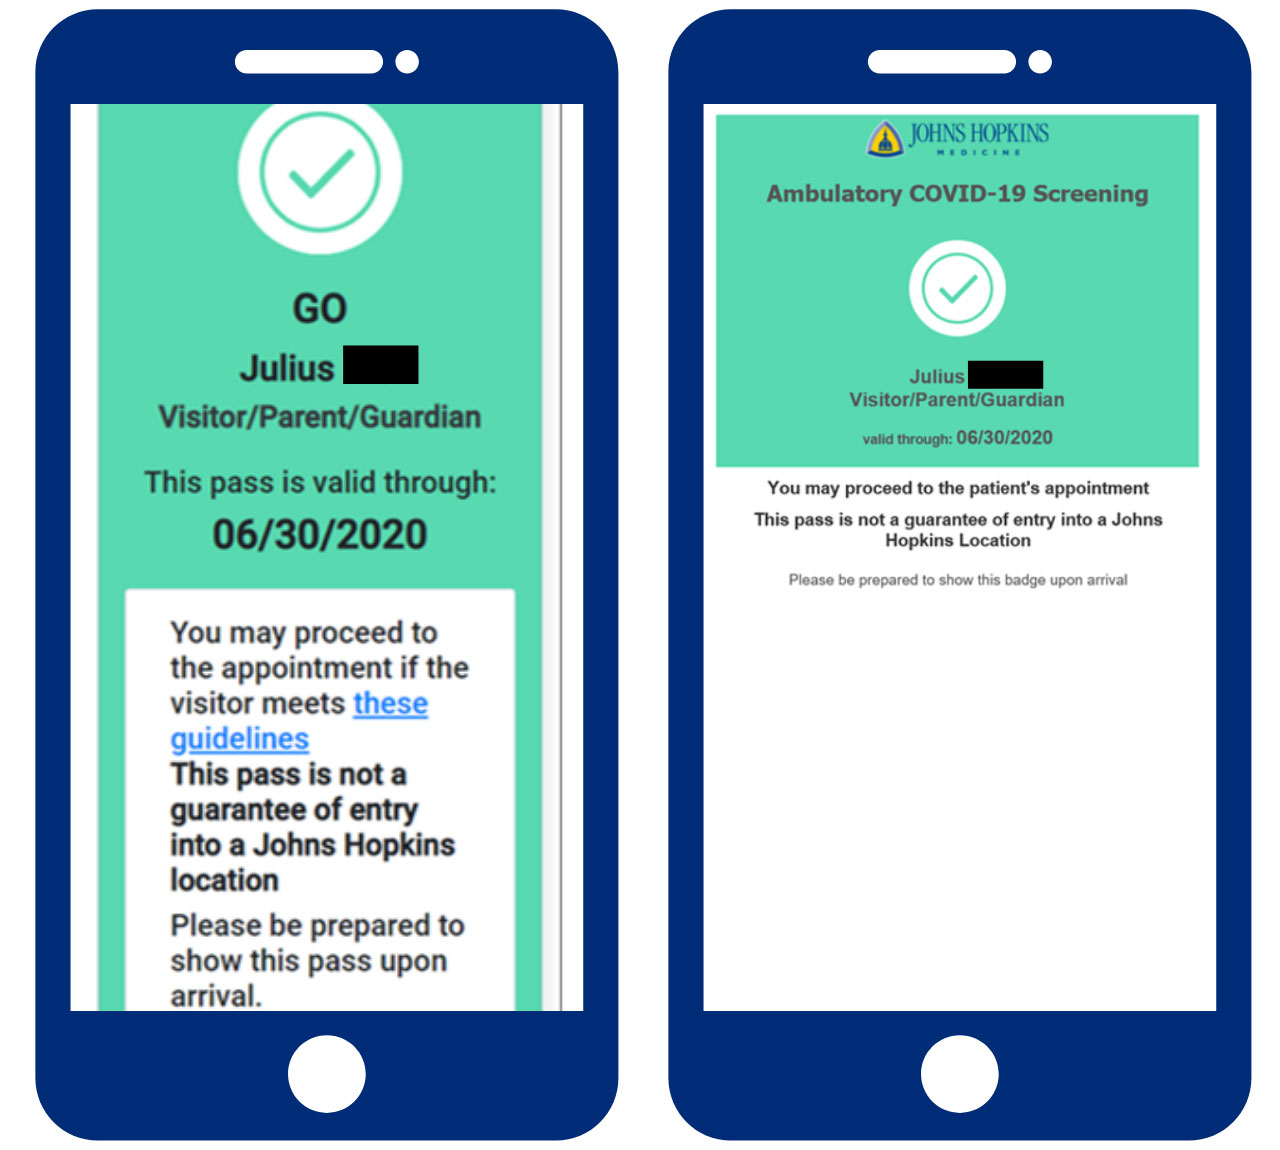 Screenshots of text and email badge confirmations stating the visitor may proceed to the appointment.